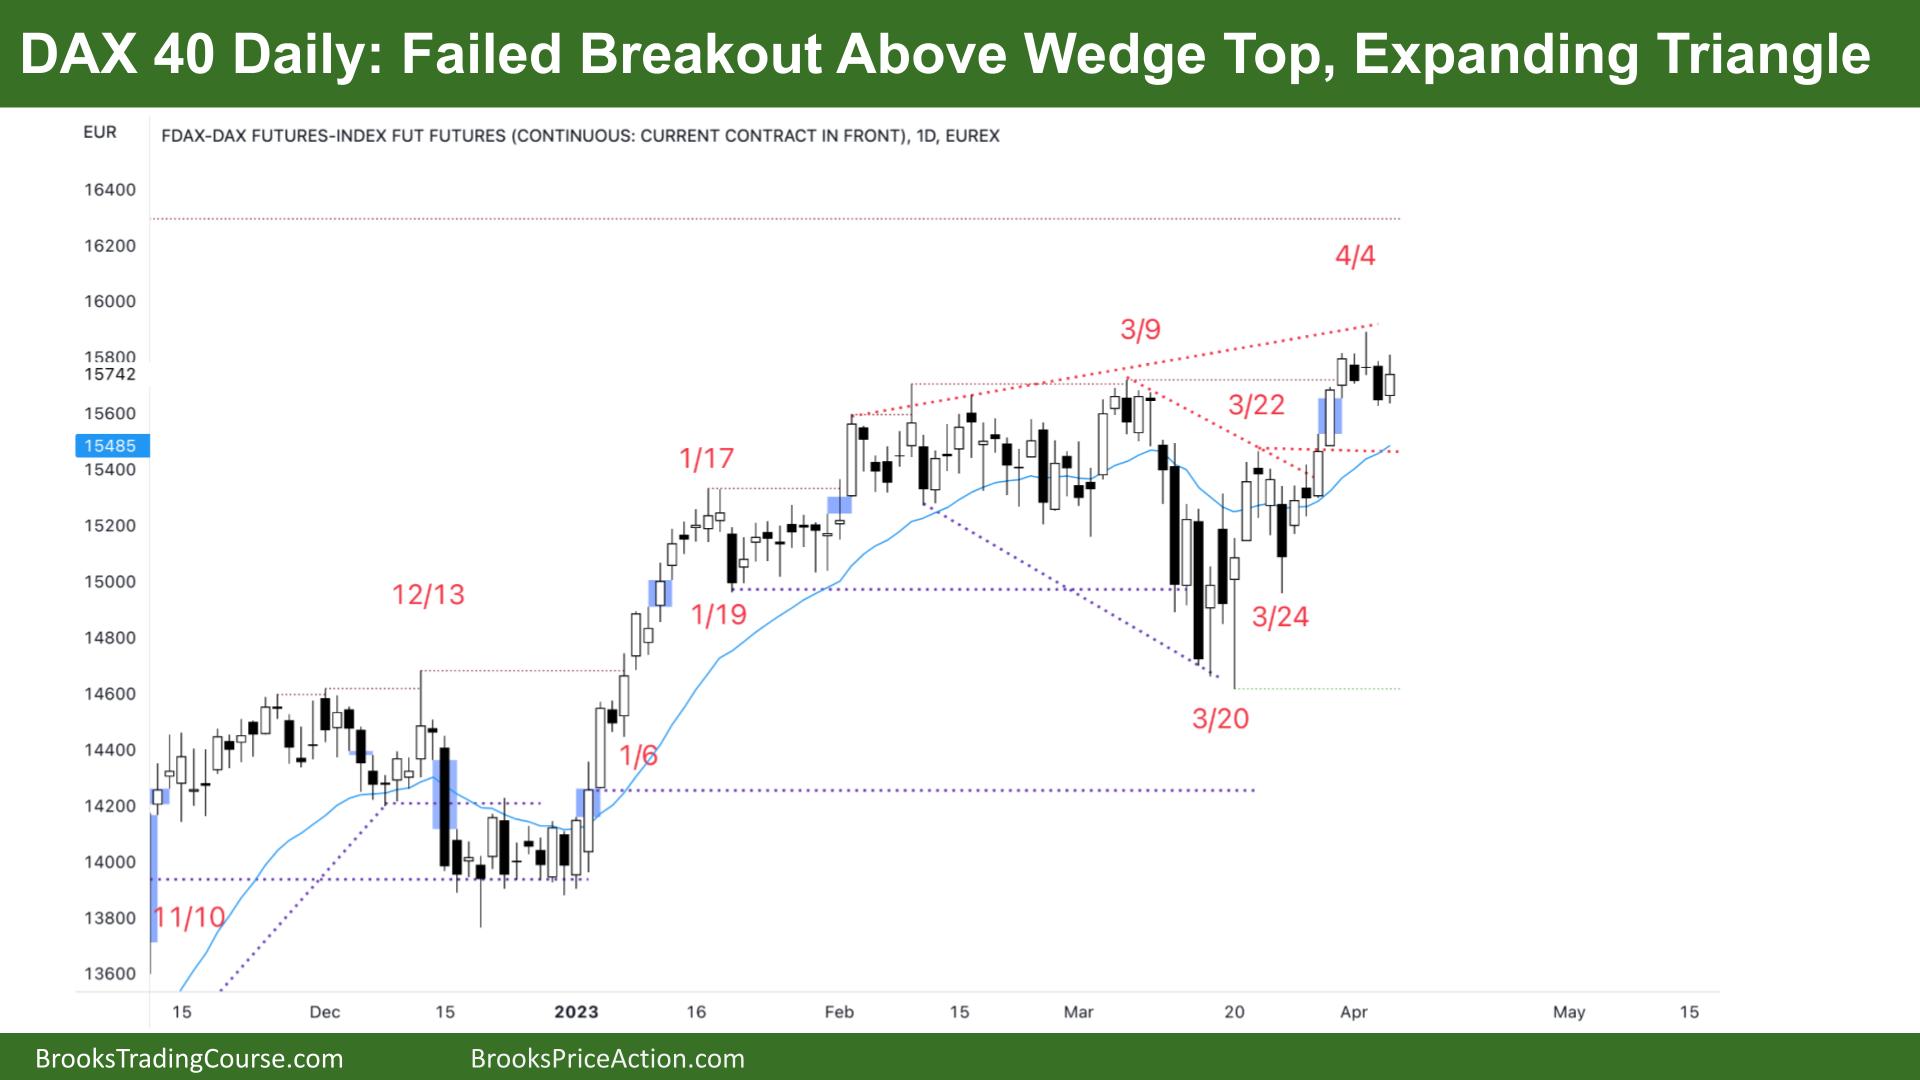 DAX 40 Failed Breakout Above Wedge Top Expanding Triangle